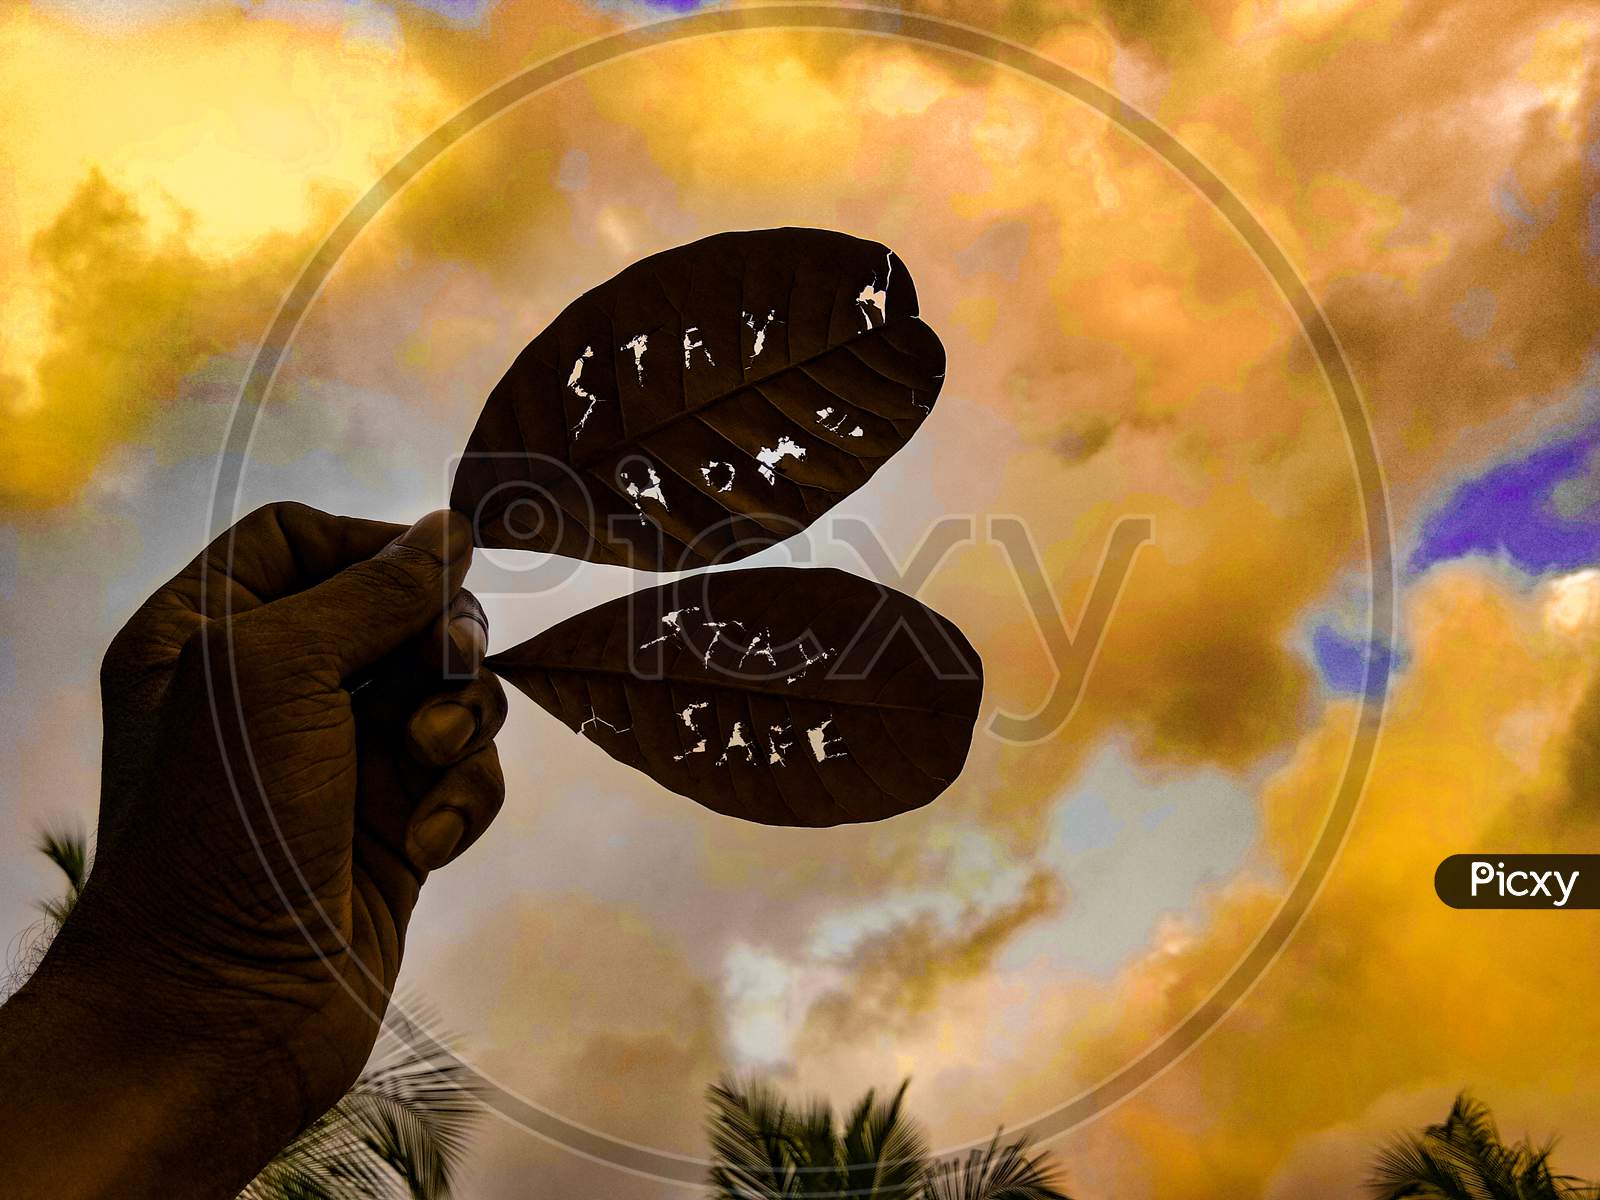 stay home stay safe carved on a dried leaf along with an closed lock placed towards bright blue sky and green background , corona pandemic lock down concept,home quarantine